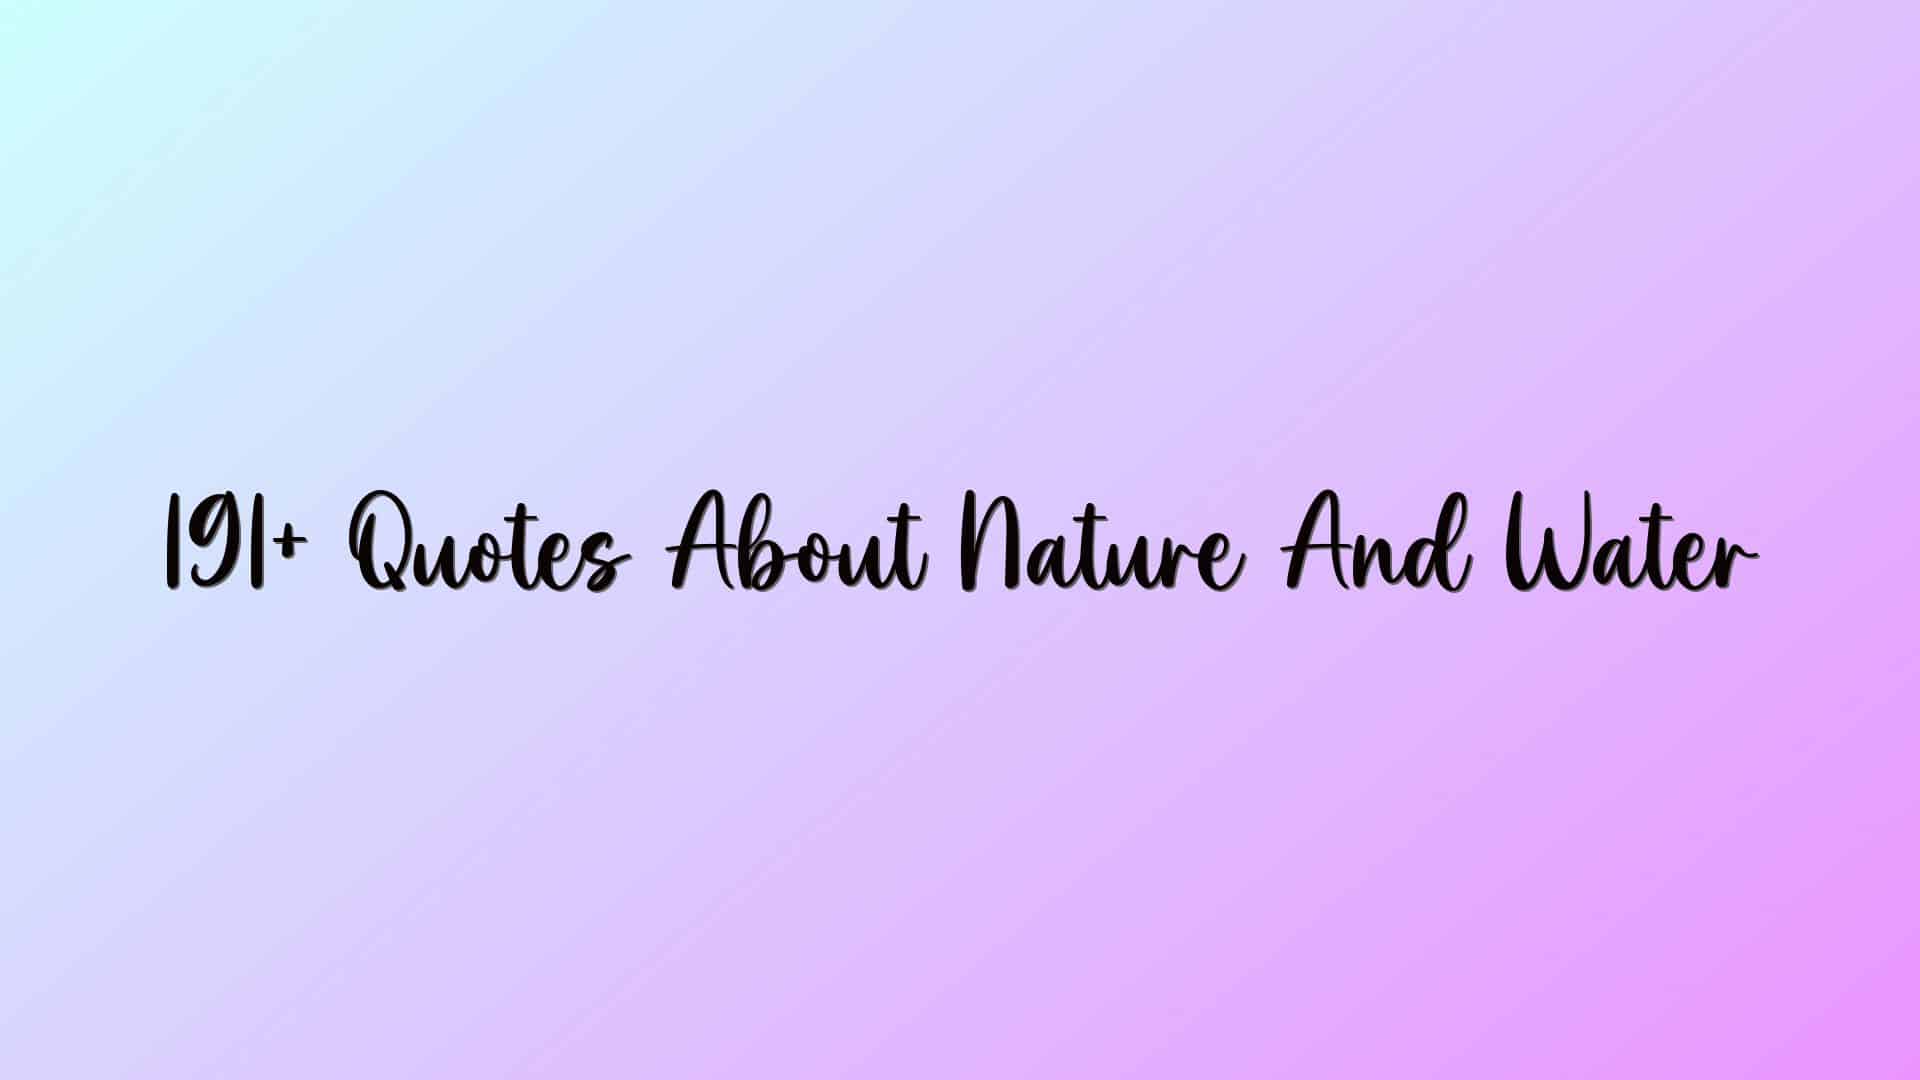 191+ Quotes About Nature And Water